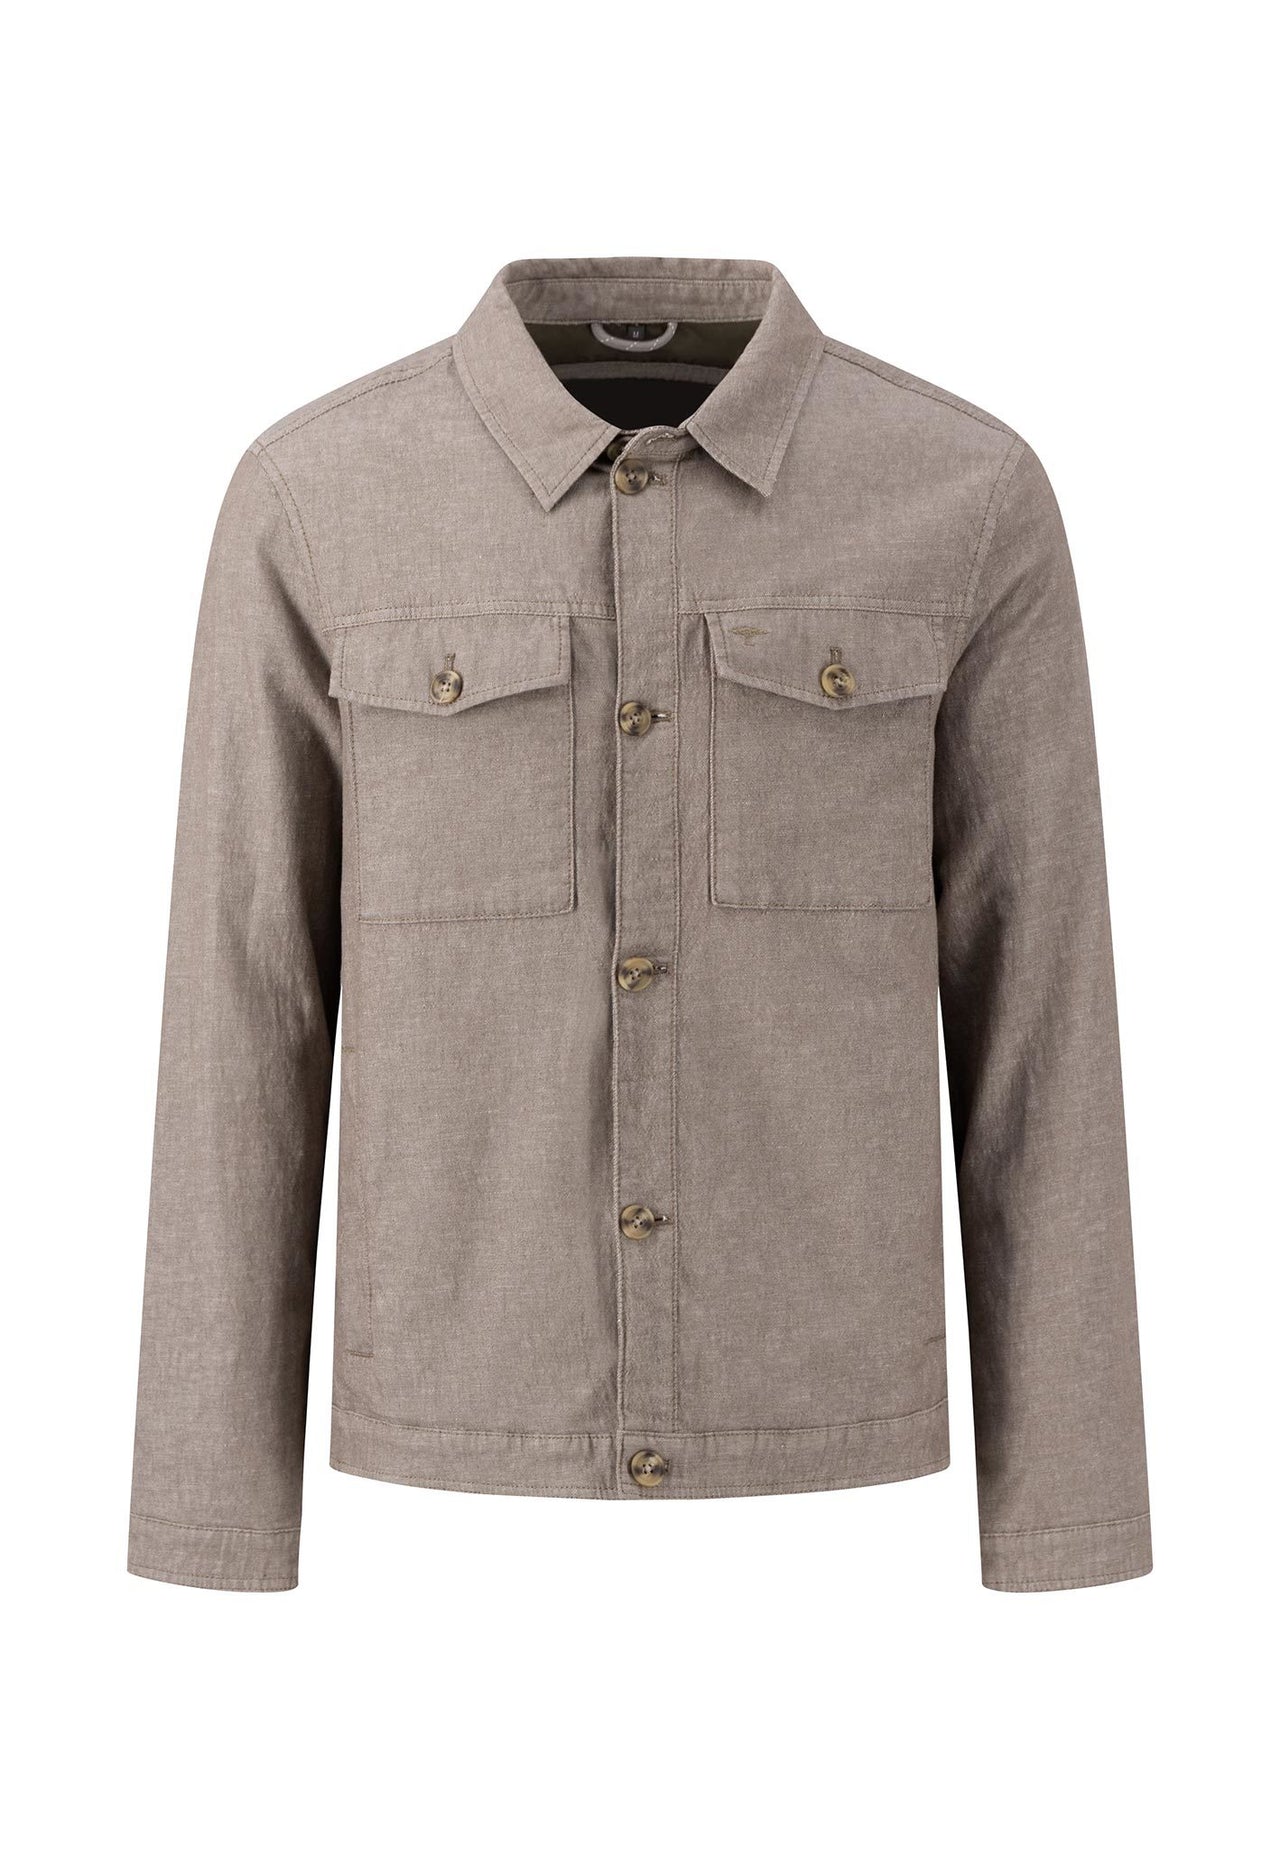 Fynch-Hatton Two Tone Structure Jacket - Dusty Olive